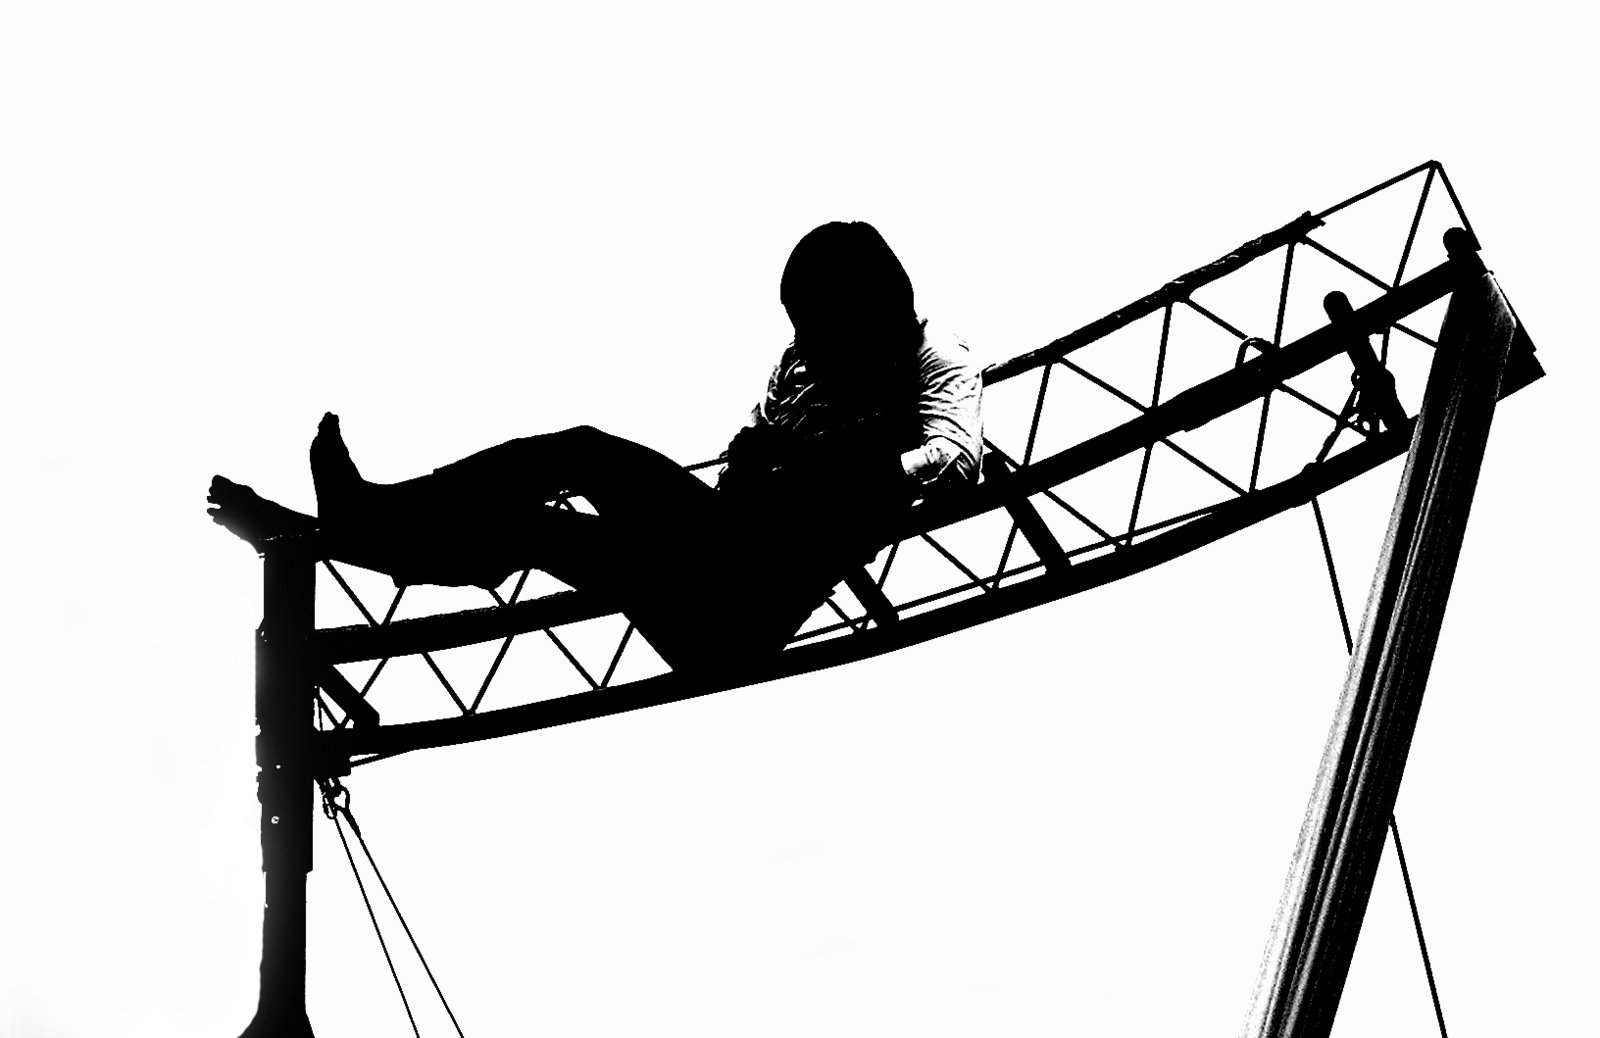 black and white silhouette of a woman riding a ride